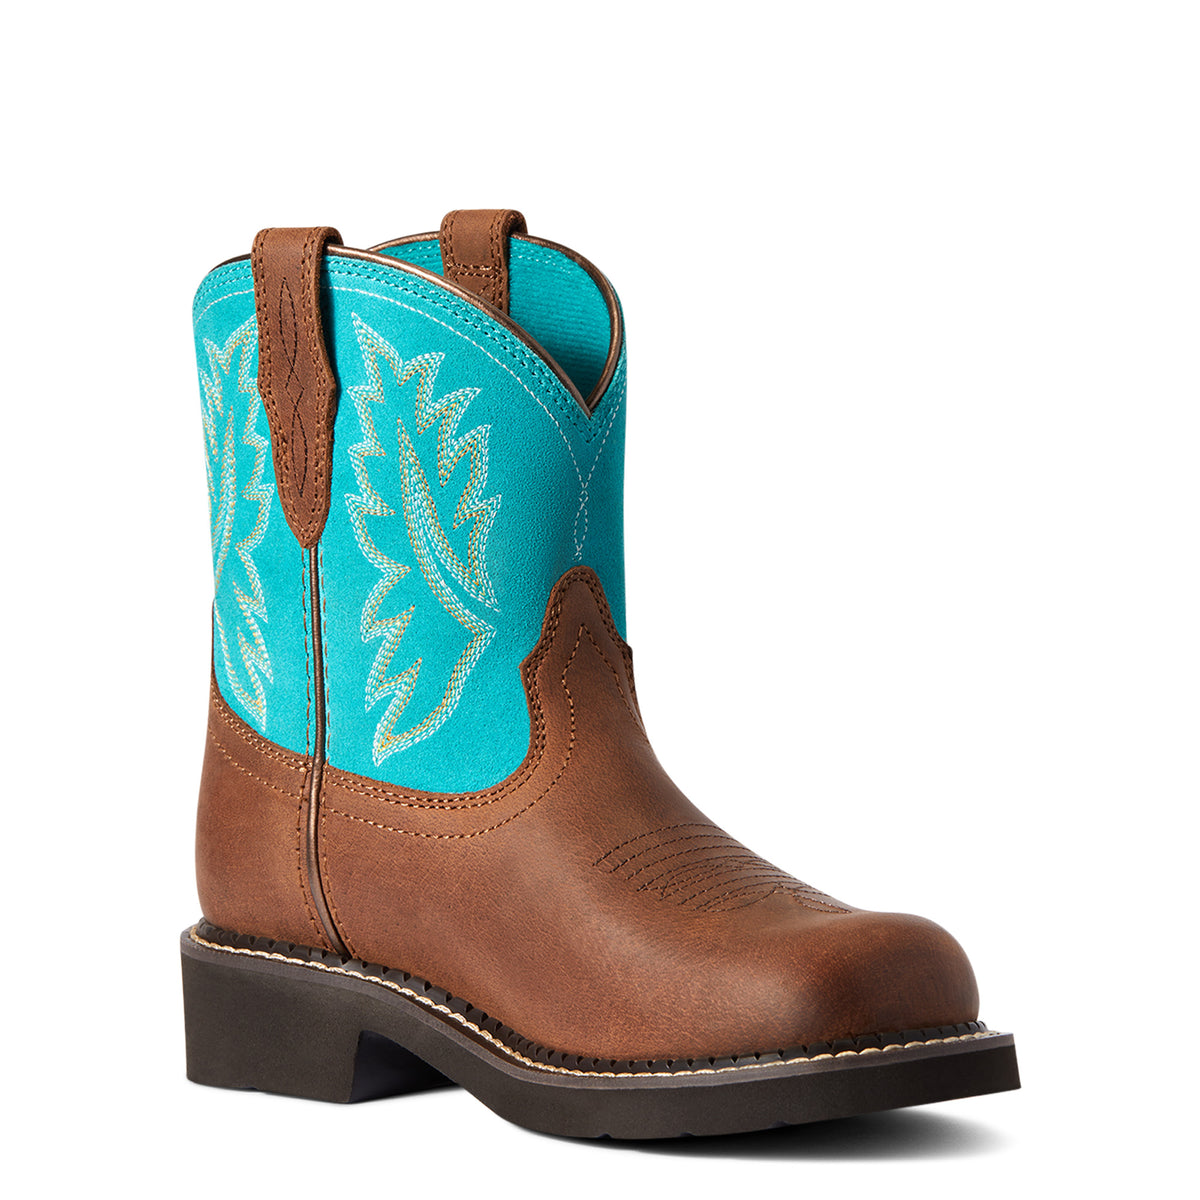 Ariat Kids Fatbaby Heritage - Distressed Brown/Turquoise